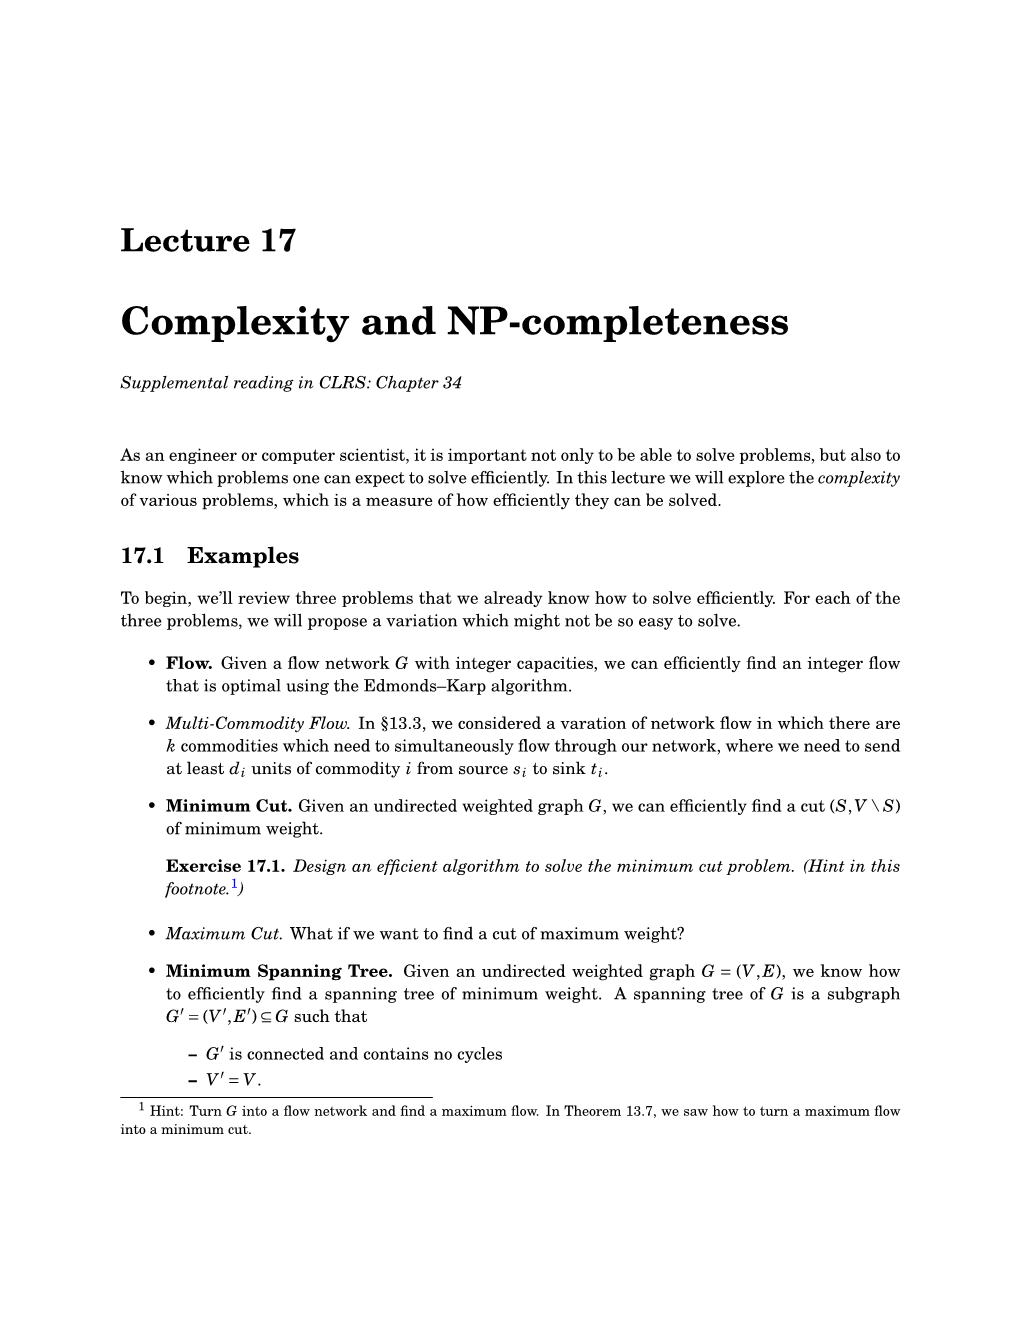 6.046J Lecture 17: Complexity and NP-Completeness